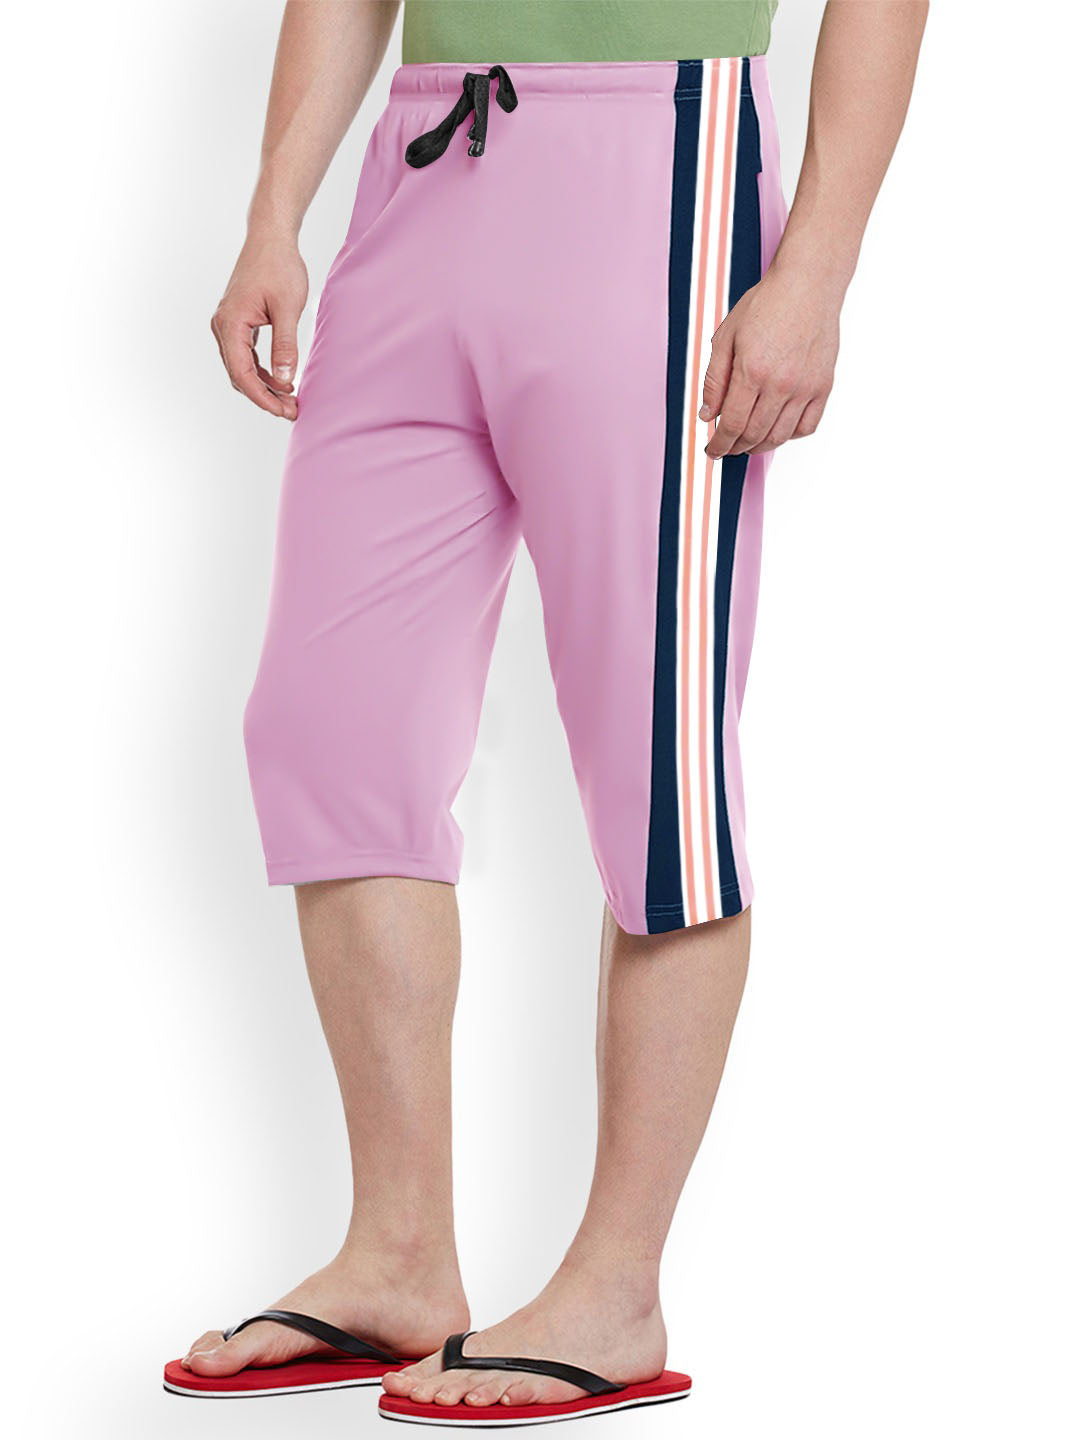 Next Single Jersey Lounge Short For Men-Pink with Stripe-SP1789